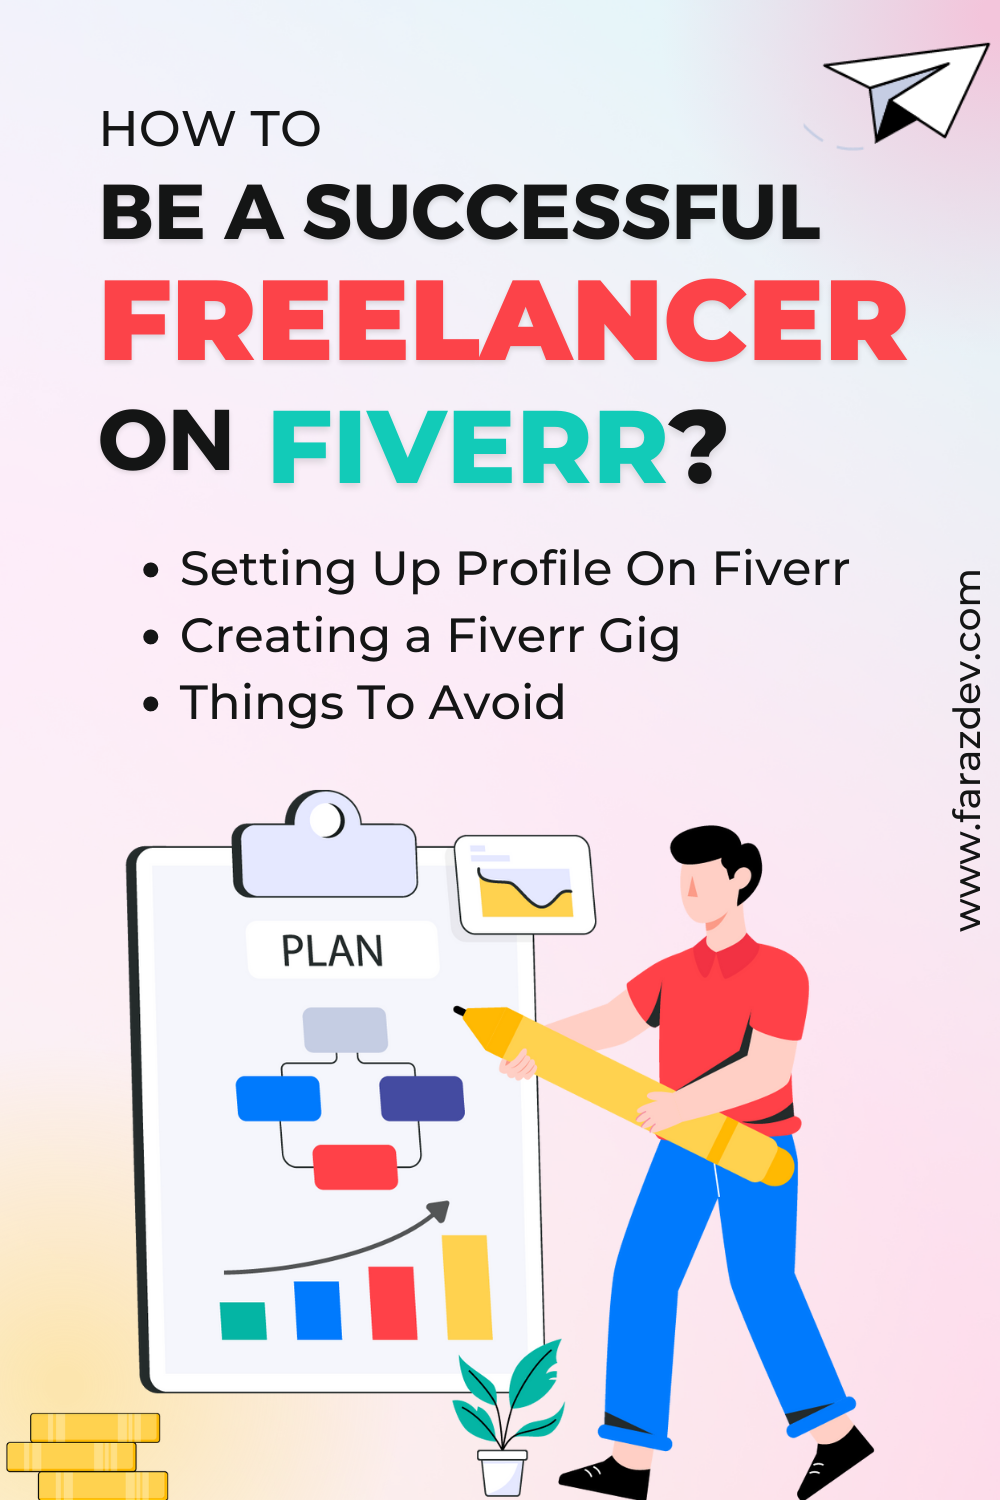 How To Be A Successful Freelancer Fiverr Freelancer How To Make